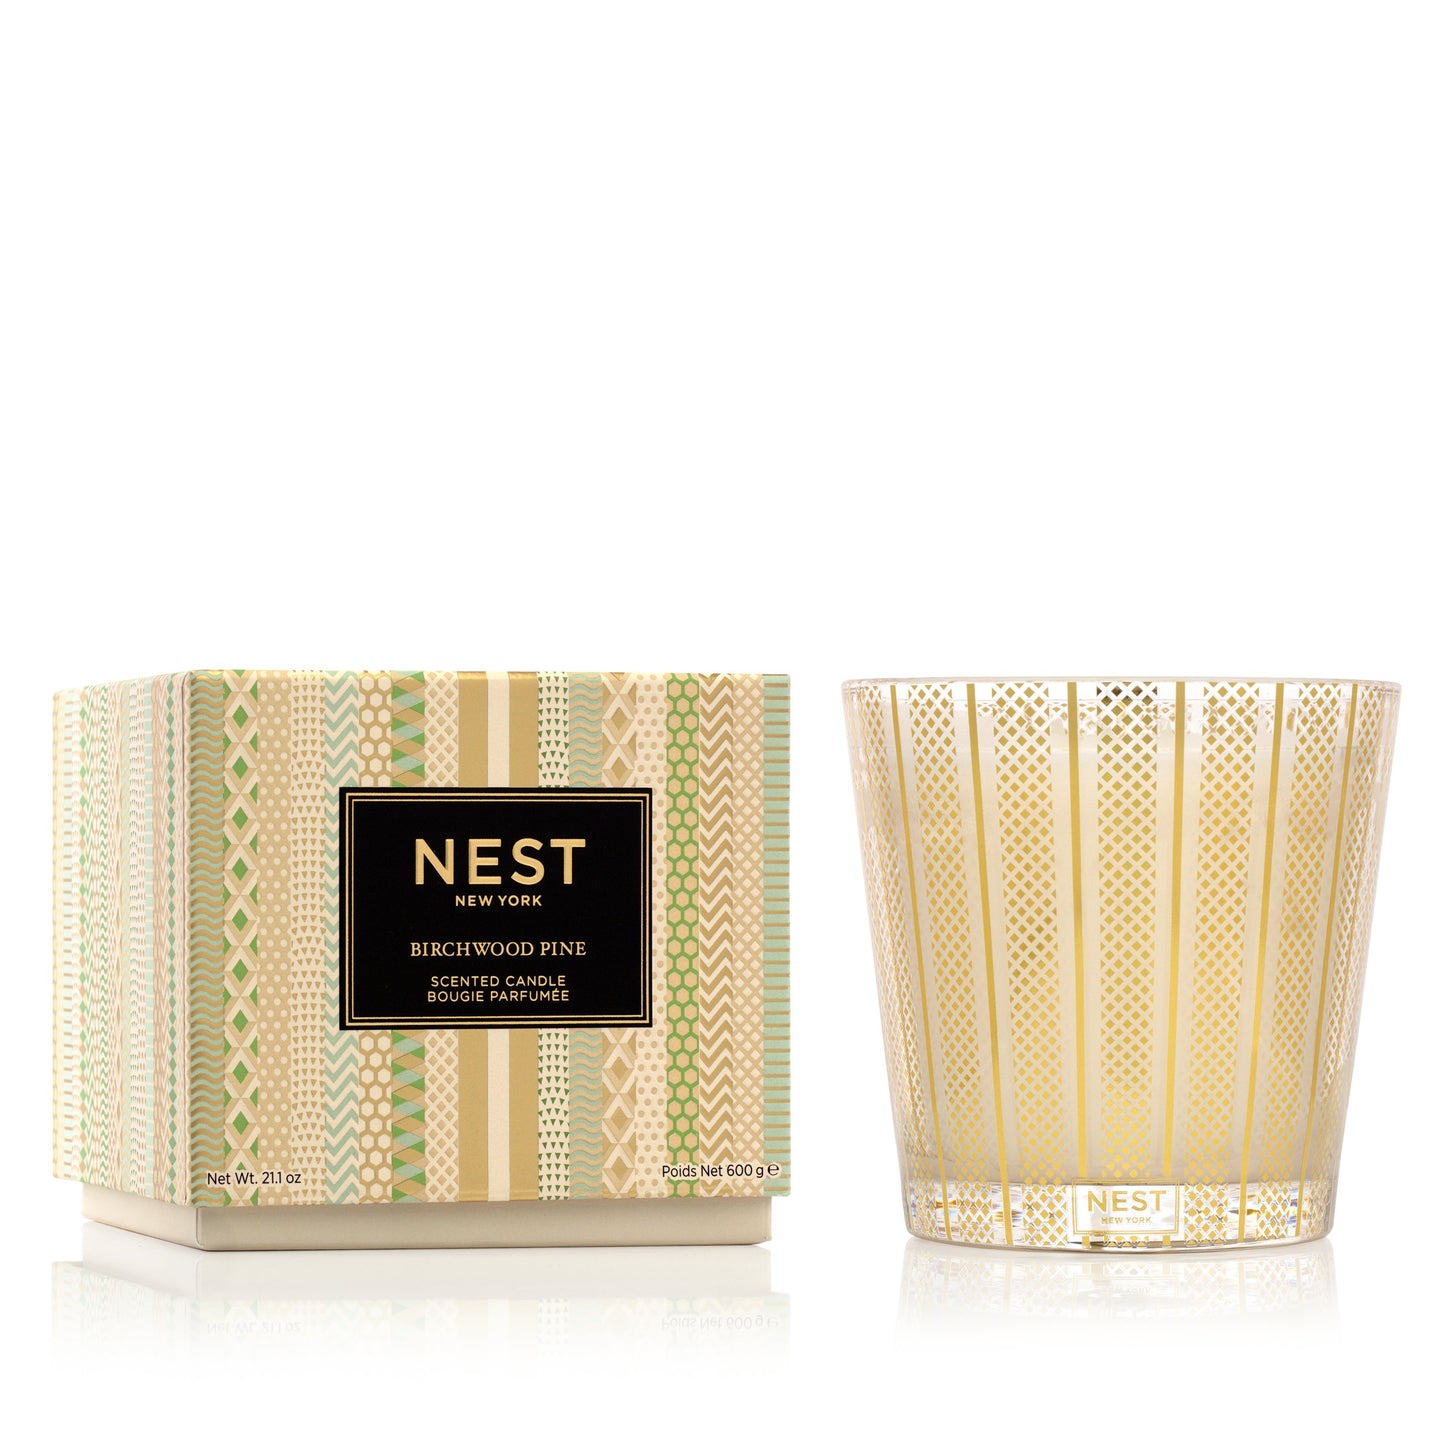 Nest 3-Wick Candle 21.1oz Candles in Birchwood Pine at Wrapsody